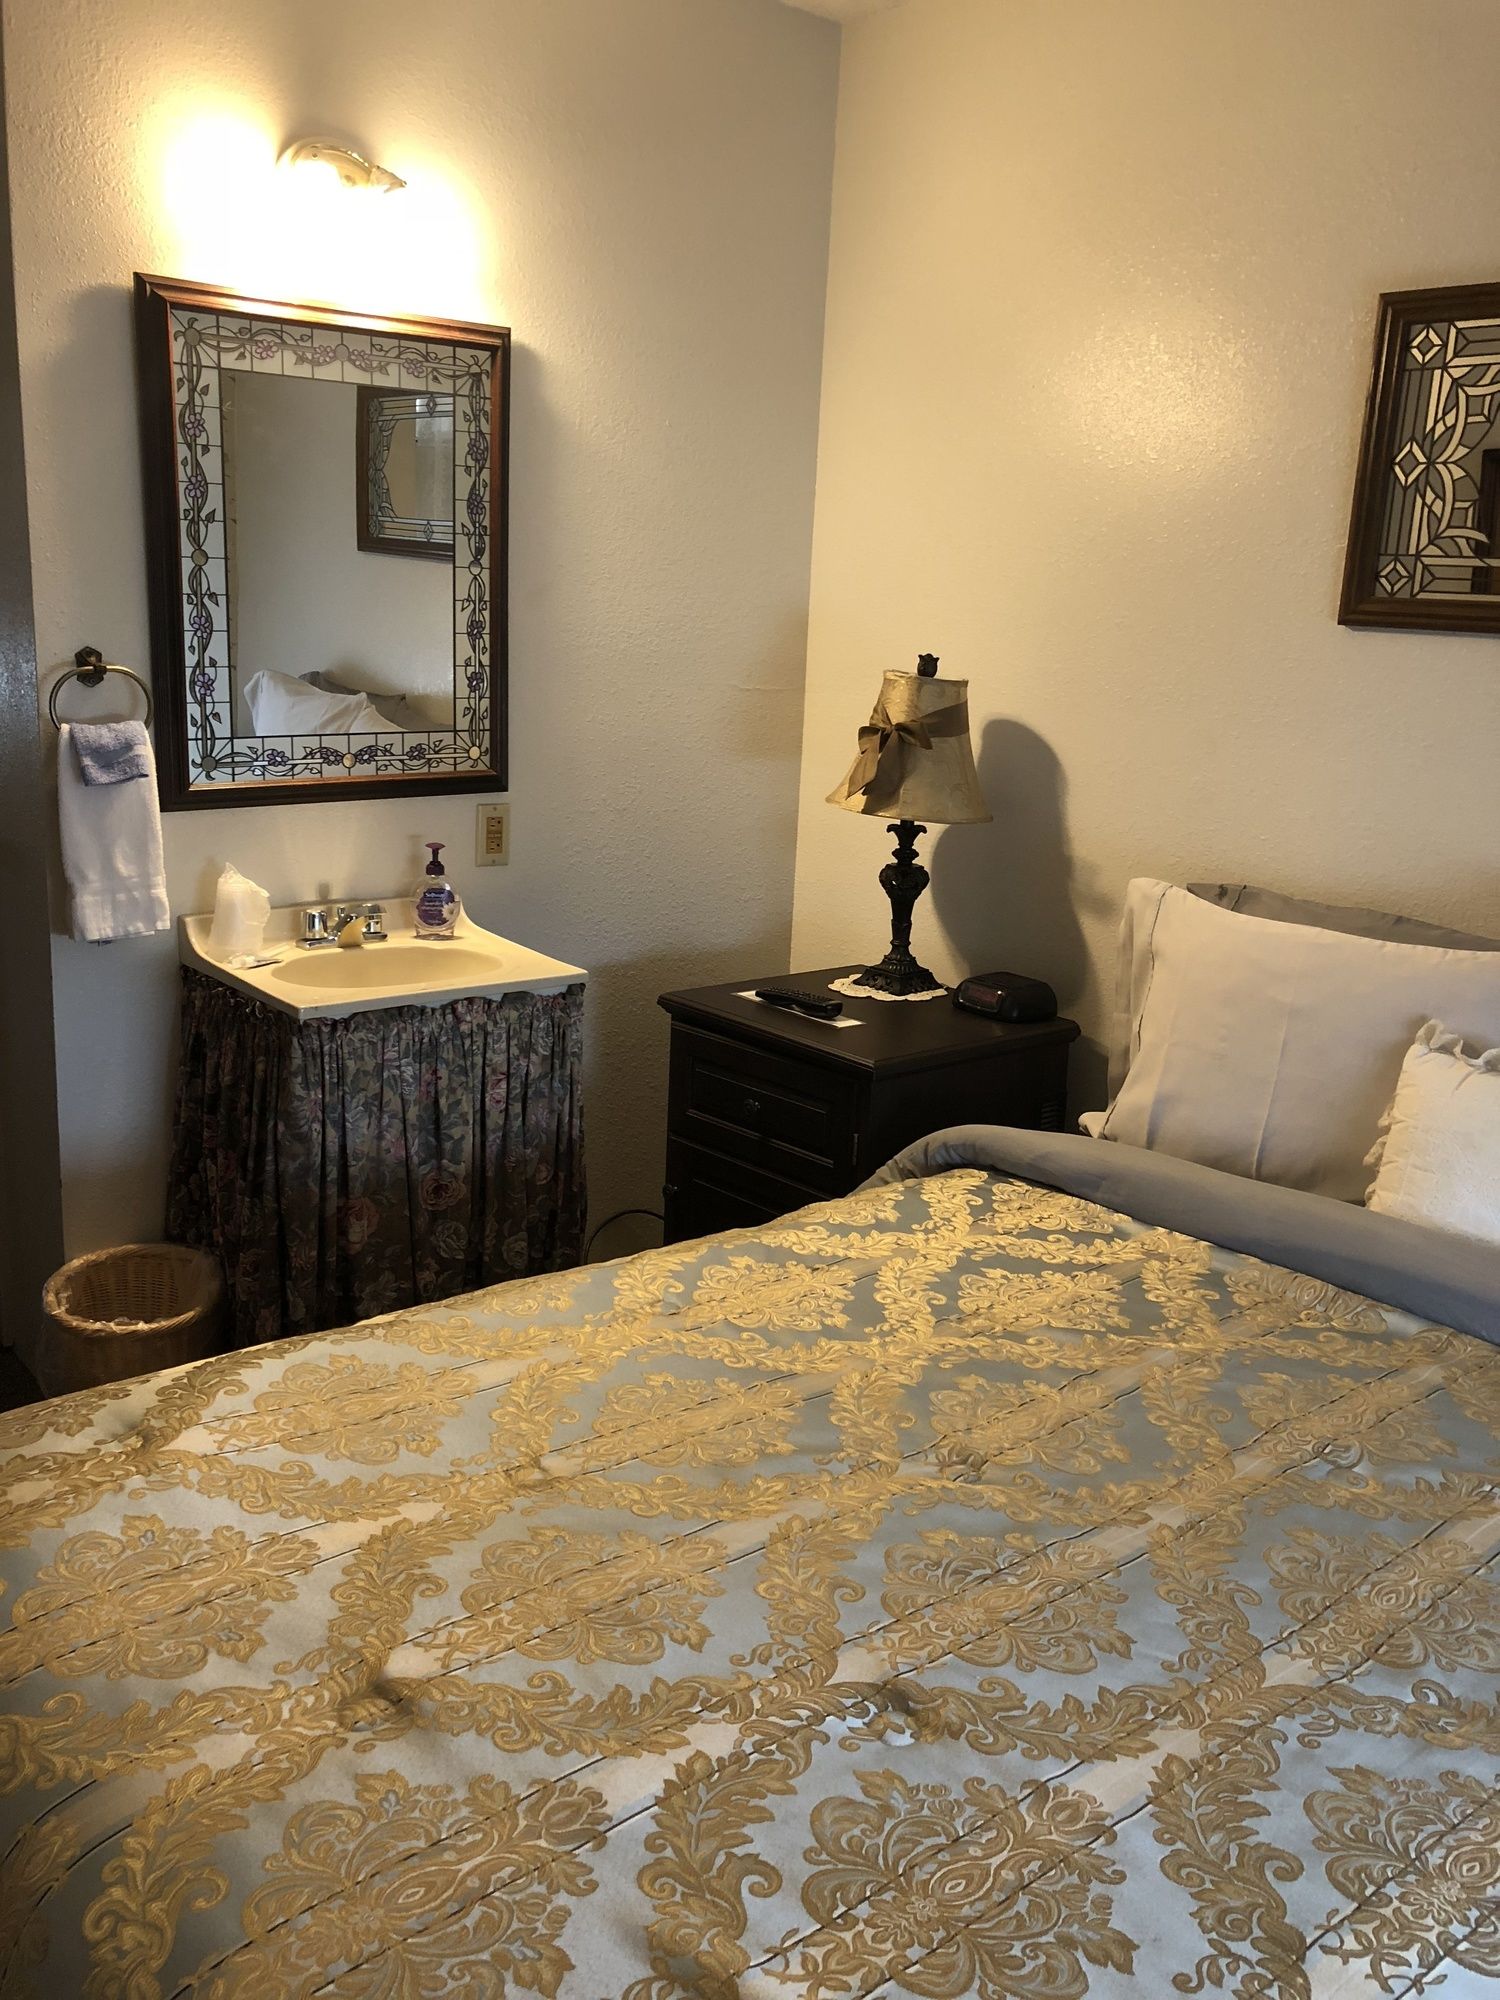 The Courtland Hotel and Day Spa